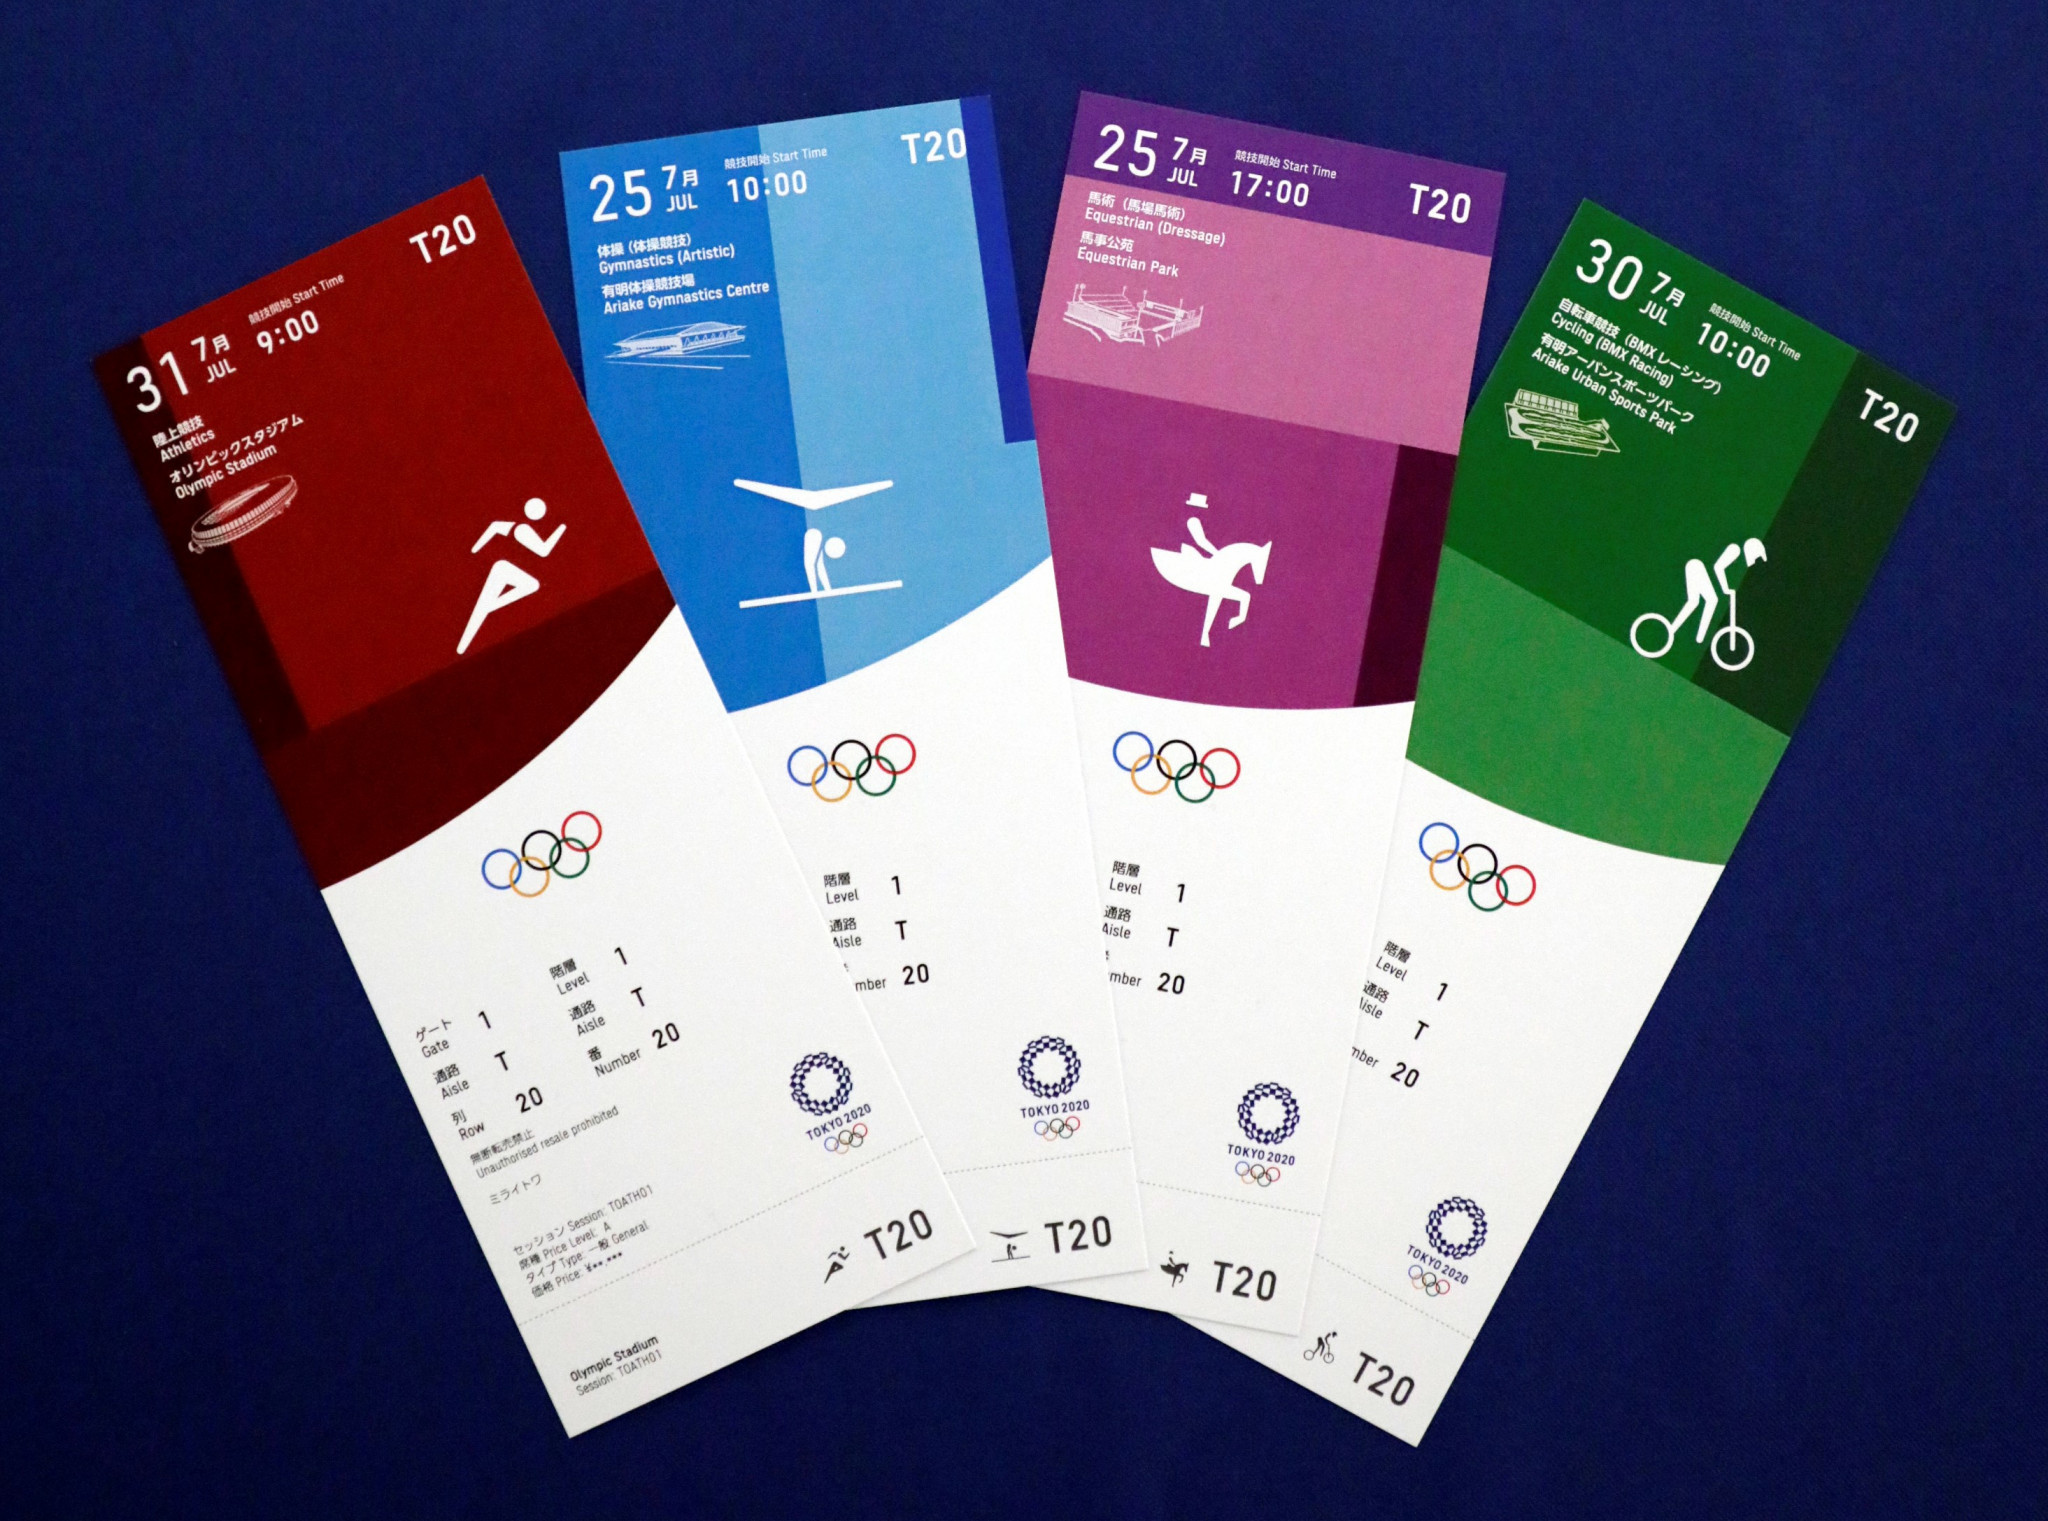 Tokyo 2020 confirms refund process for Olympic and Paralympic Games